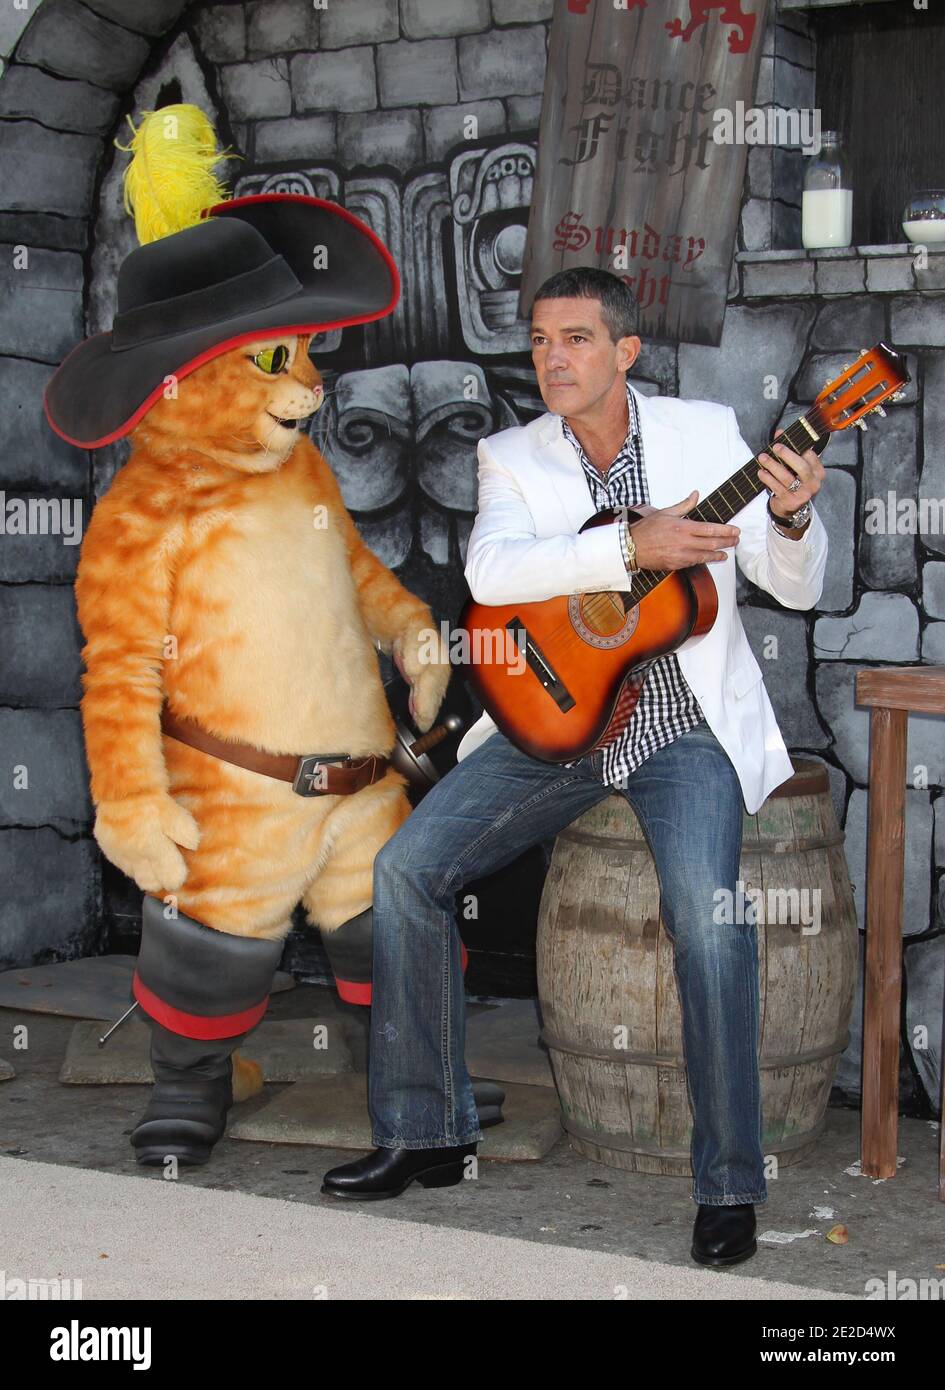 Antonio Banderas at the LA premiere for animated movie 'Puss In Boots' at the Regency Village Theatre in Westwood, Los Angeles, CA, USA on October 23, 2011. Photo by Baxter/ABACAPRESS.COM Stock Photo